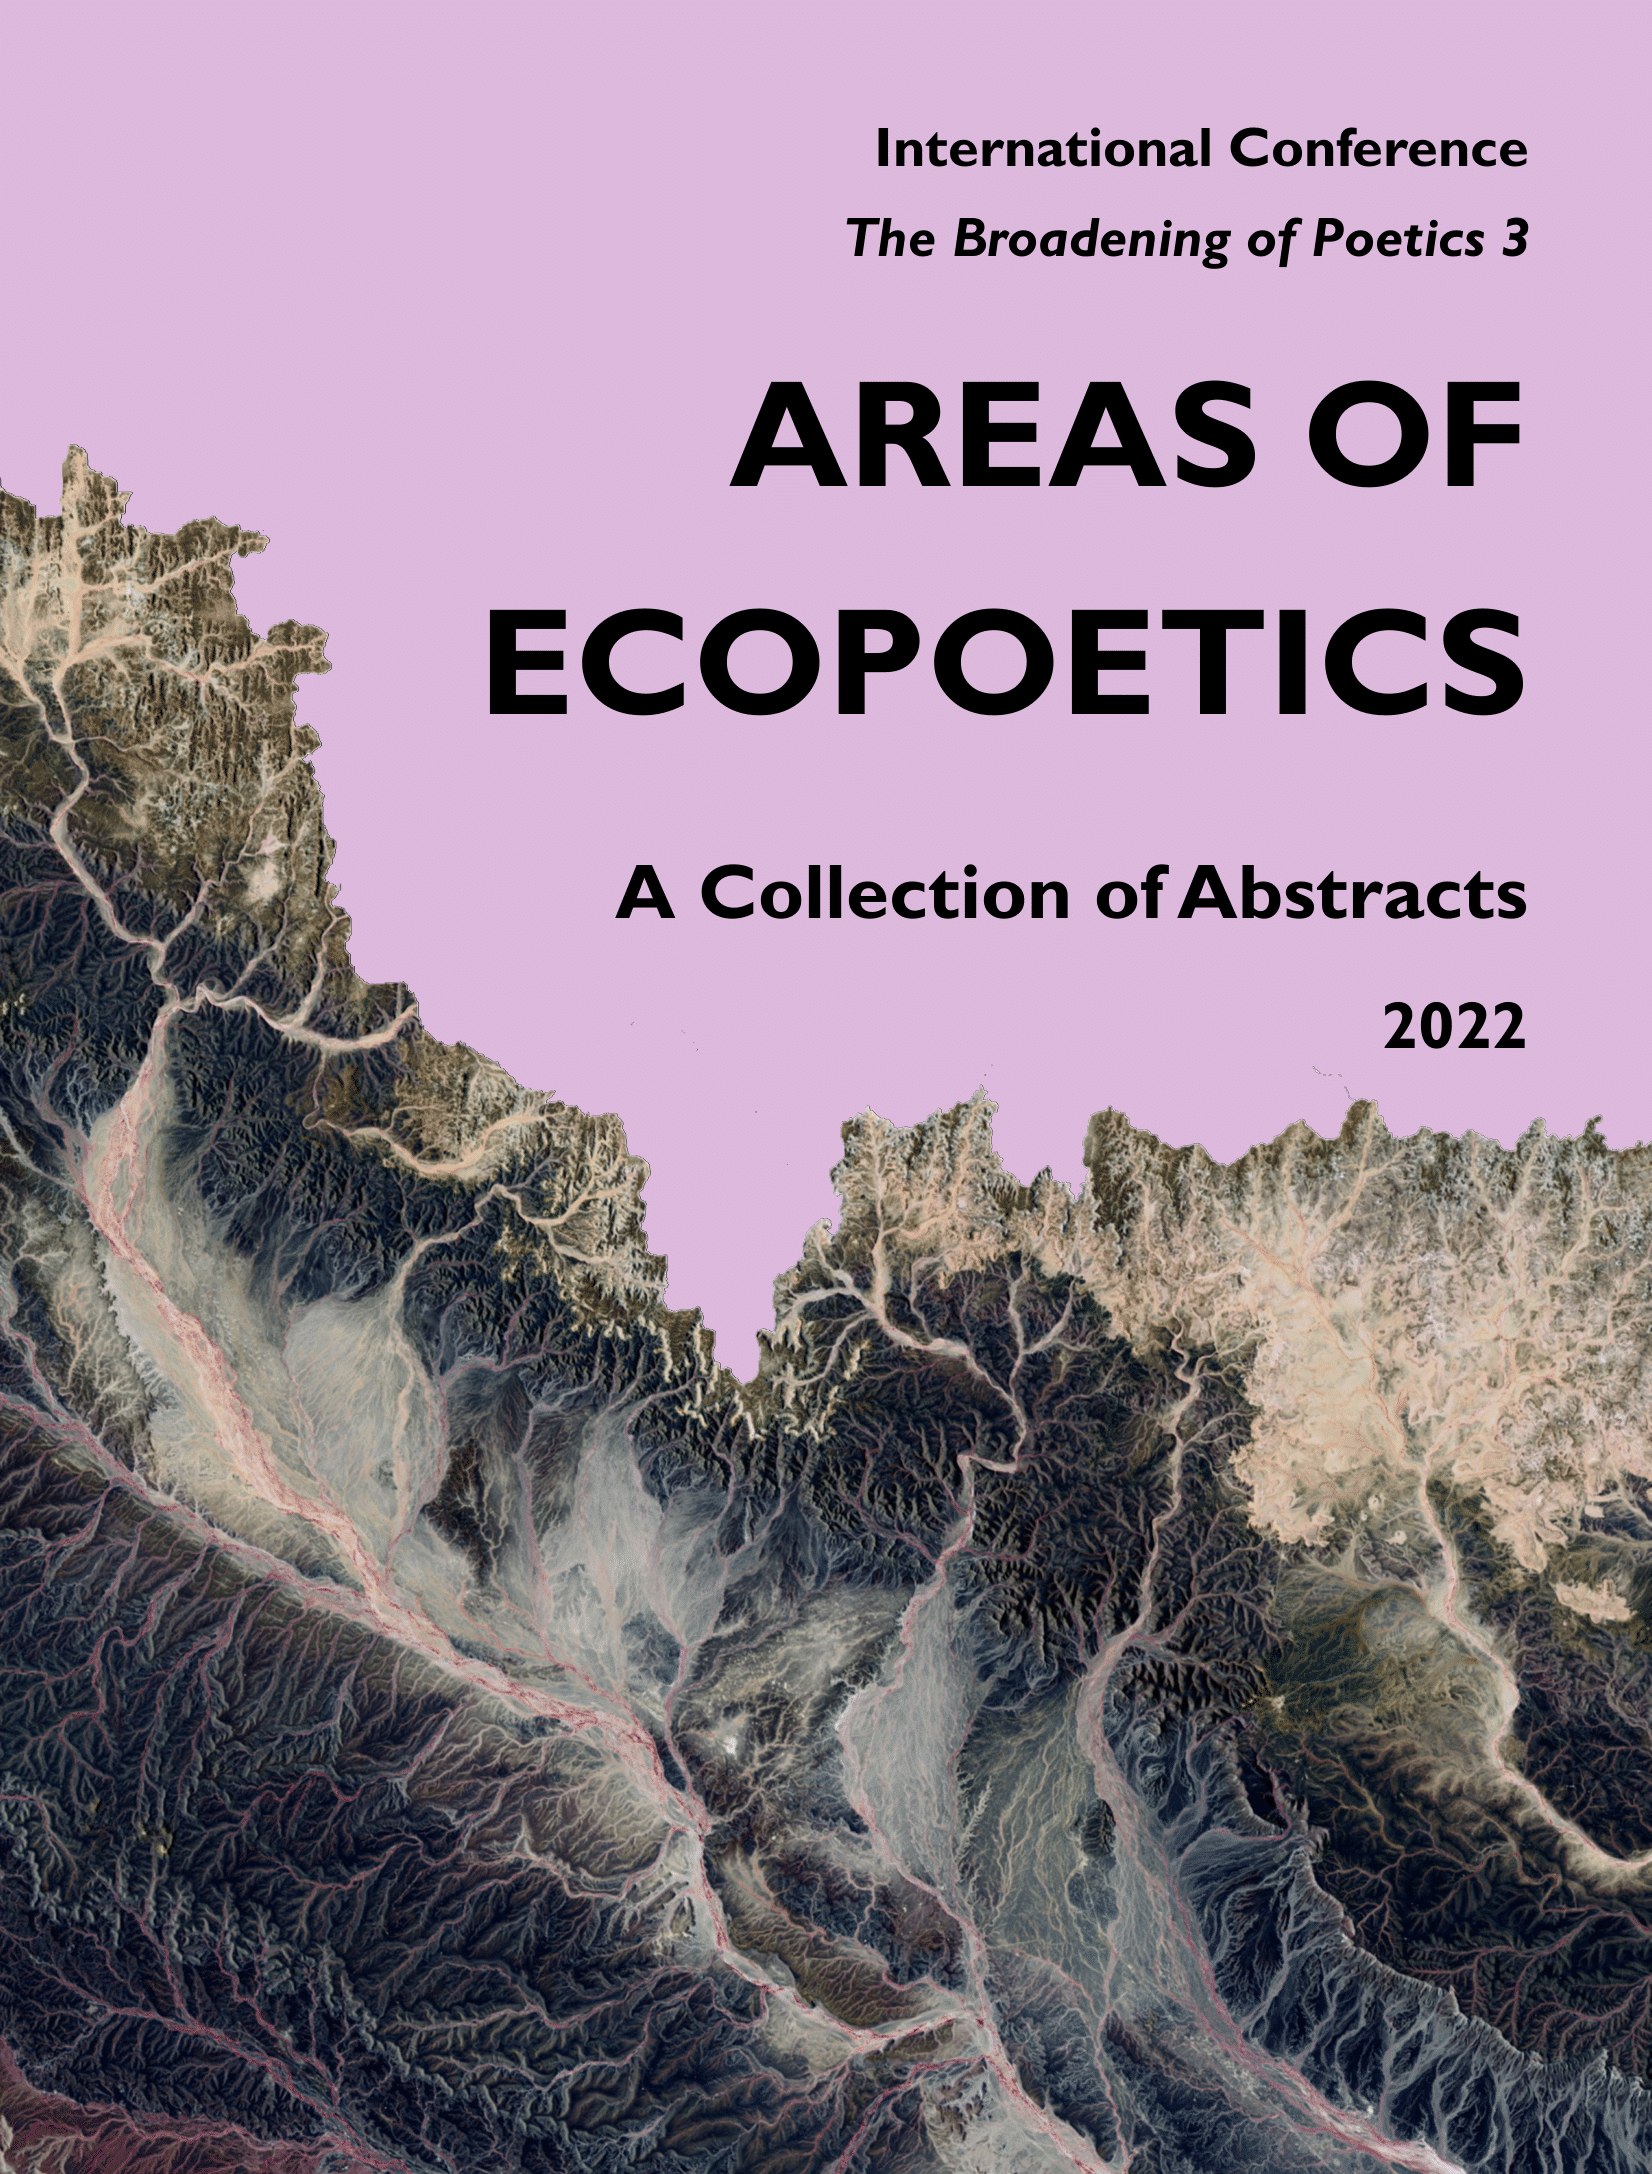 AREAS OF ECOPOETICS : A Collection of Abstracts from the International Conference The Broadening of Poetics 3